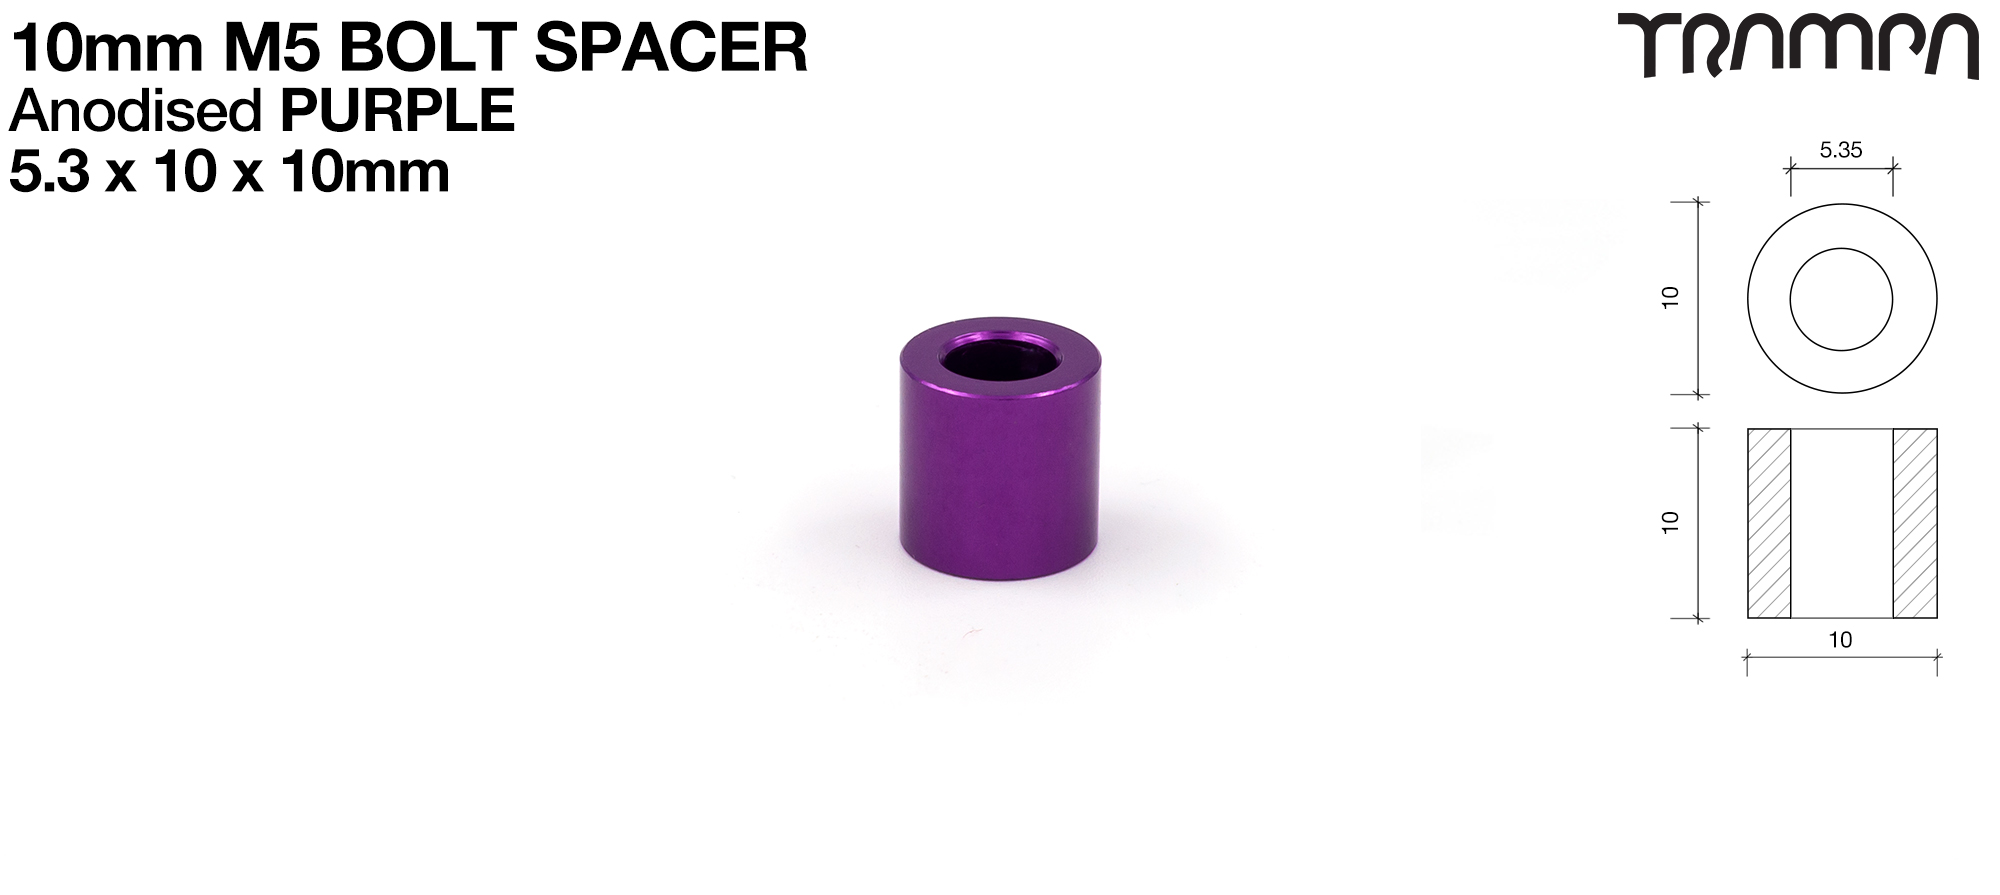 M5 x 10 x 10mm Spacer - Anodised PURPLE